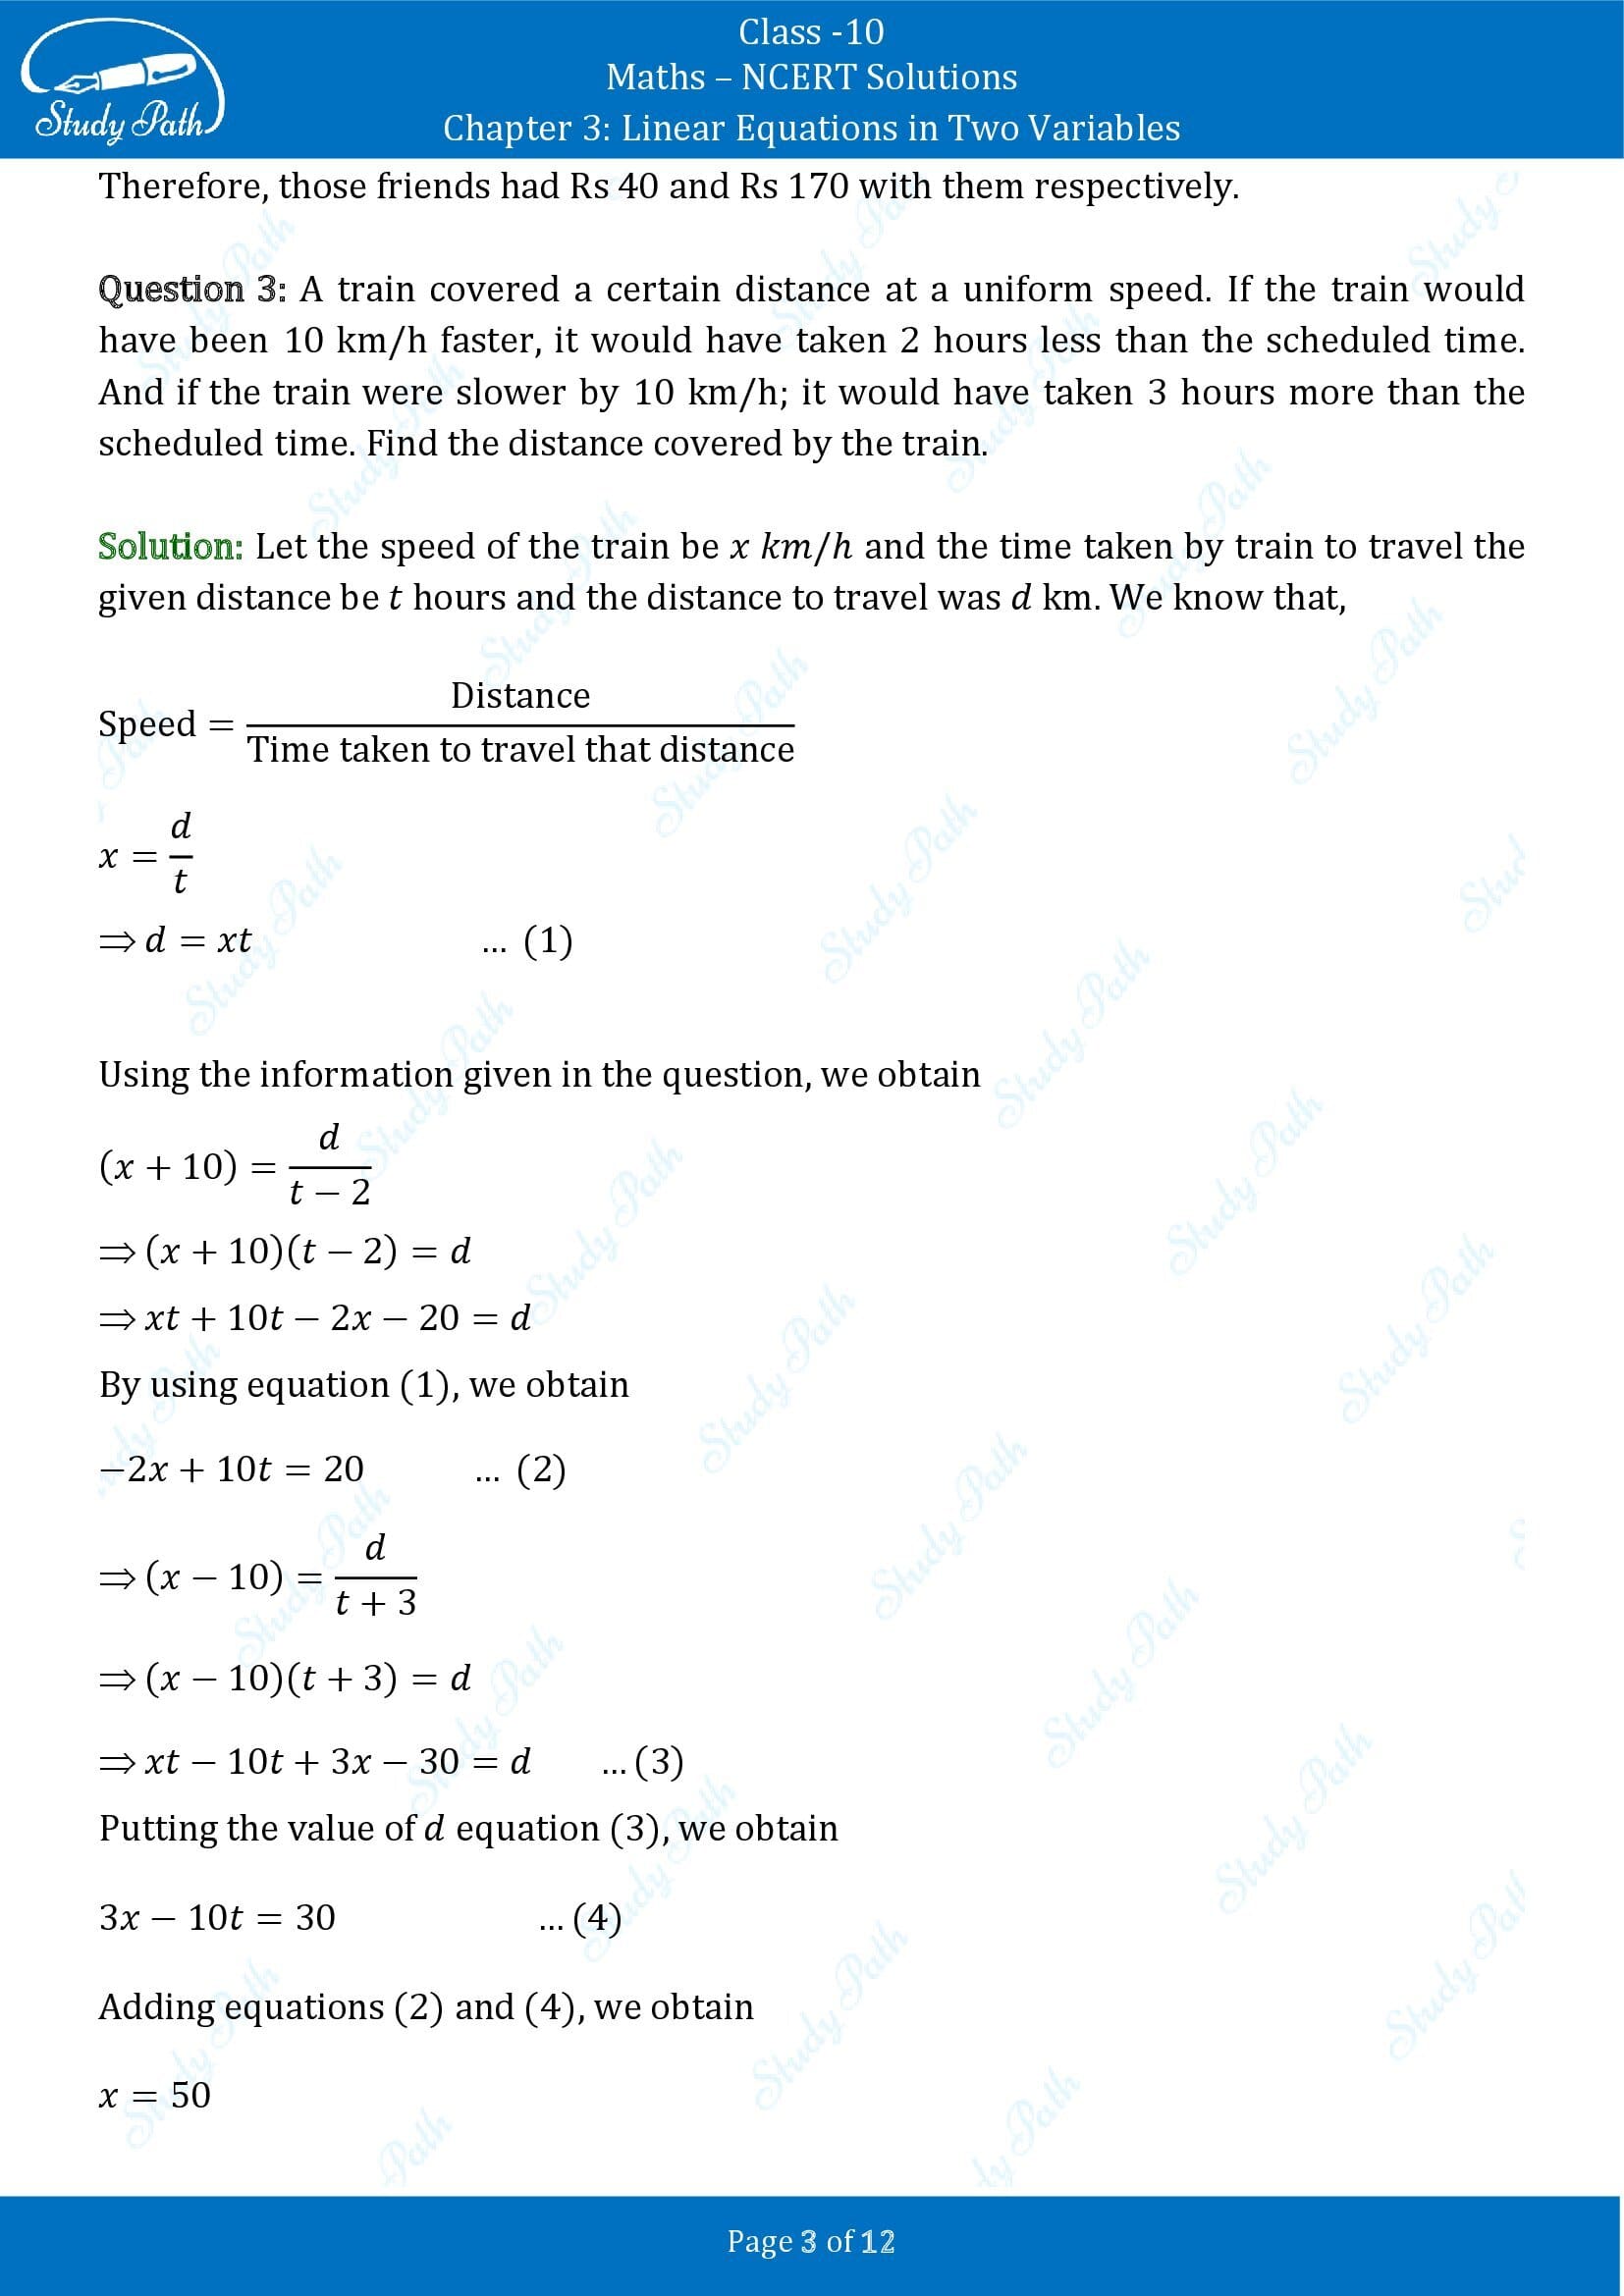 NCERT Solutions for Class 10 Maths Chapter 3 Linear Equations in Two Variables Exercise 3.7 00003